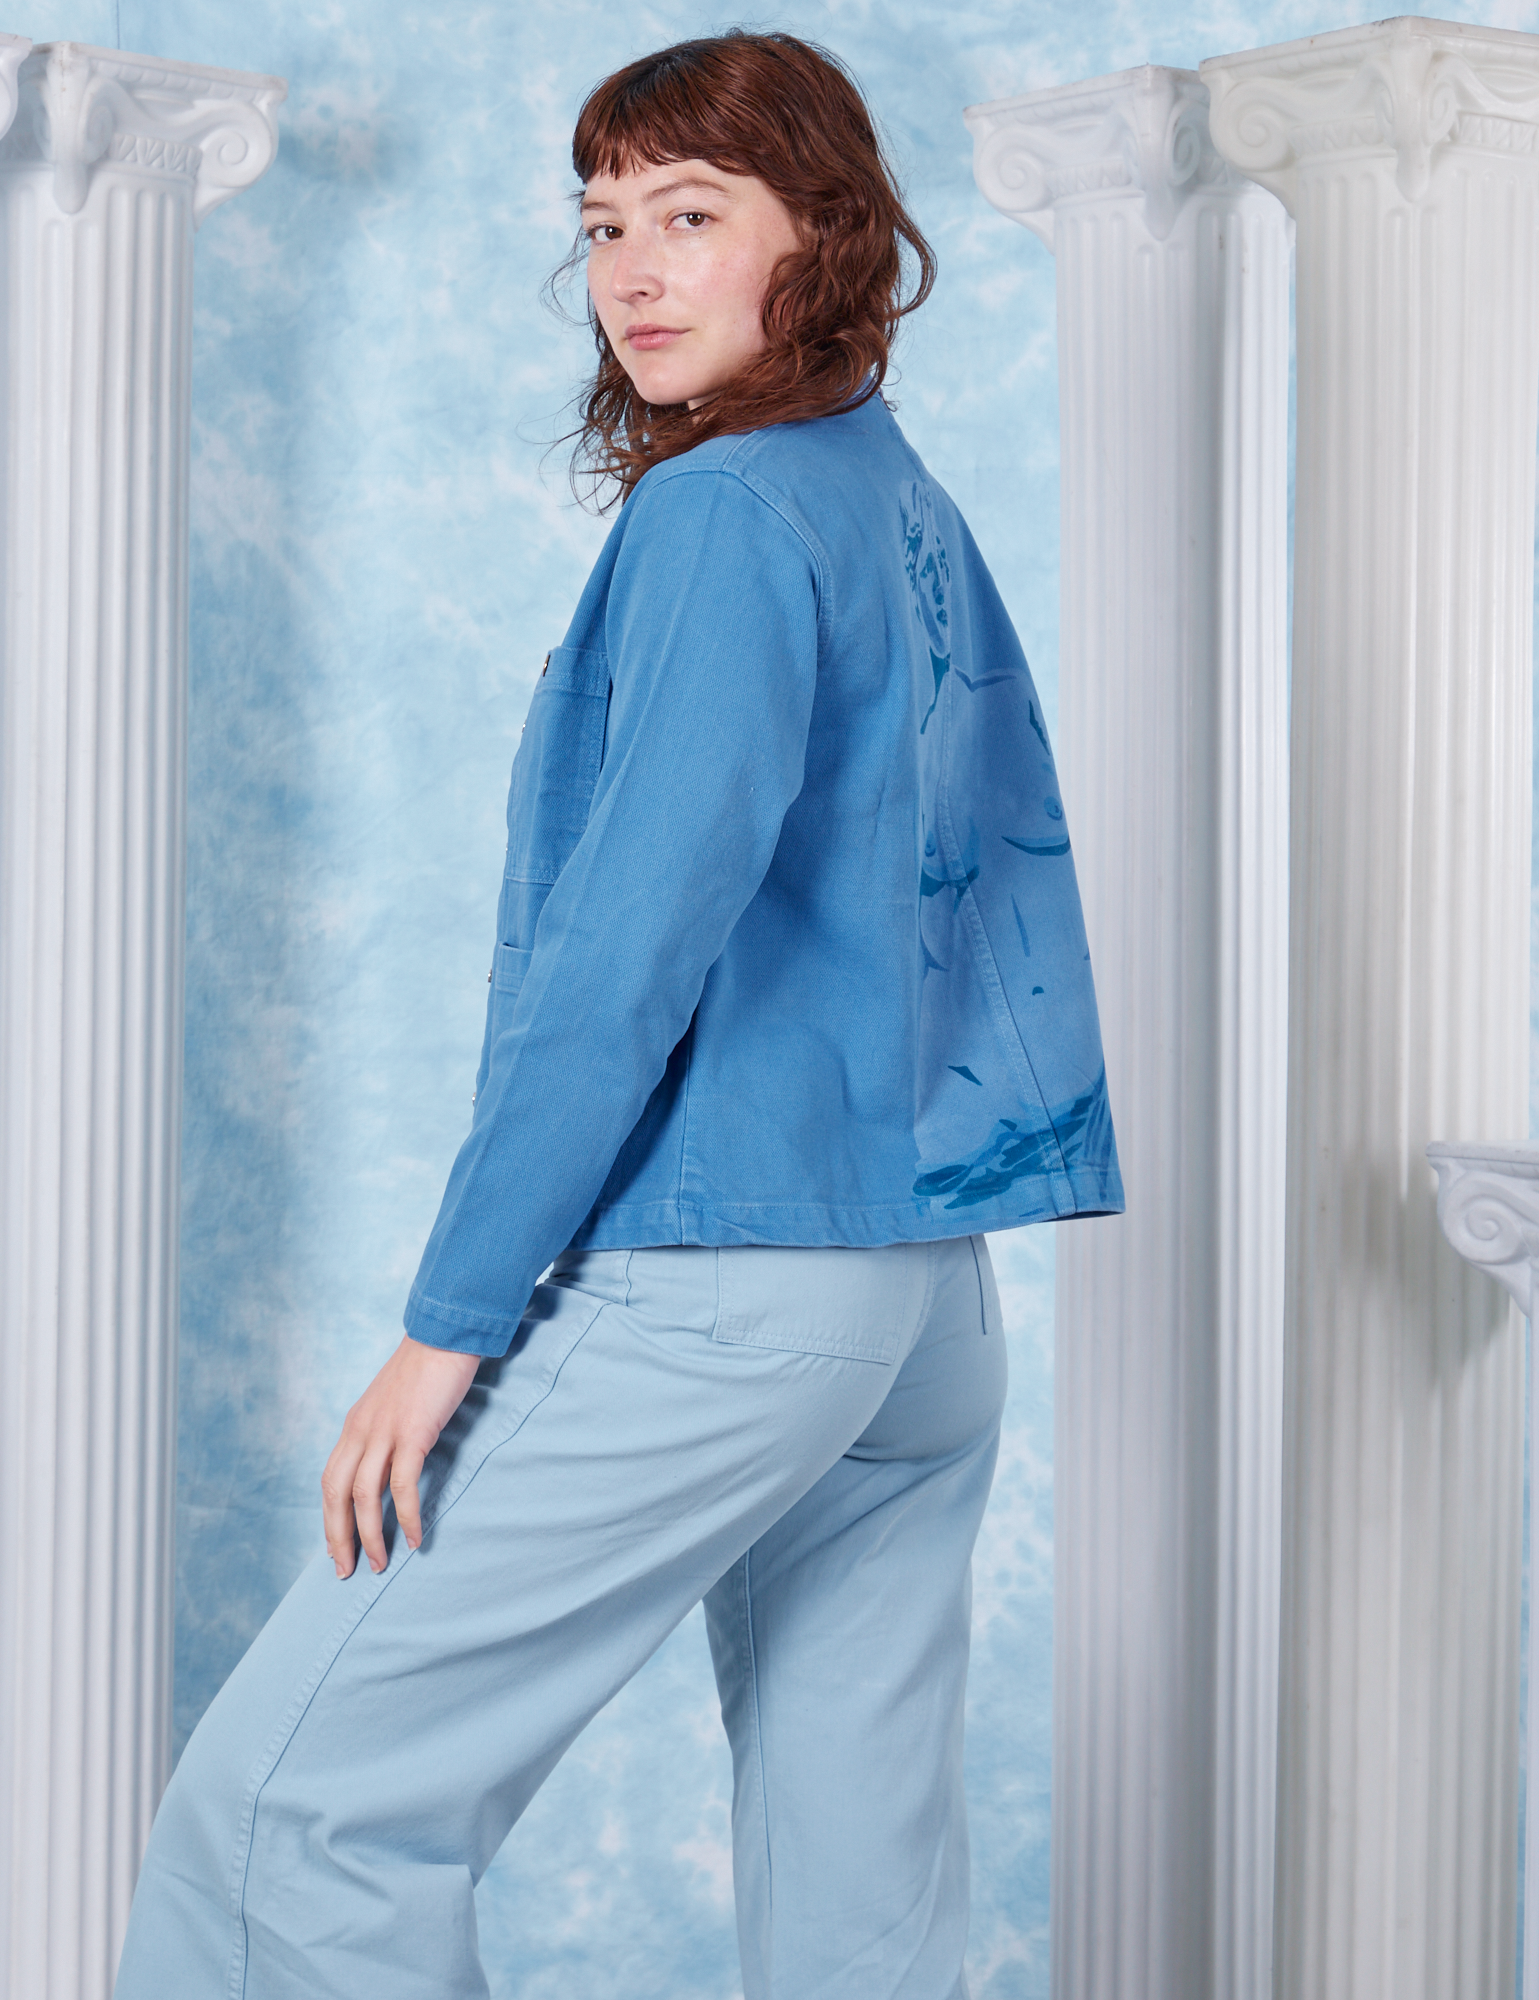 Neoclassical Work Jacket in Blue Venus side view on Alex wearing baby blue Bell Bottoms